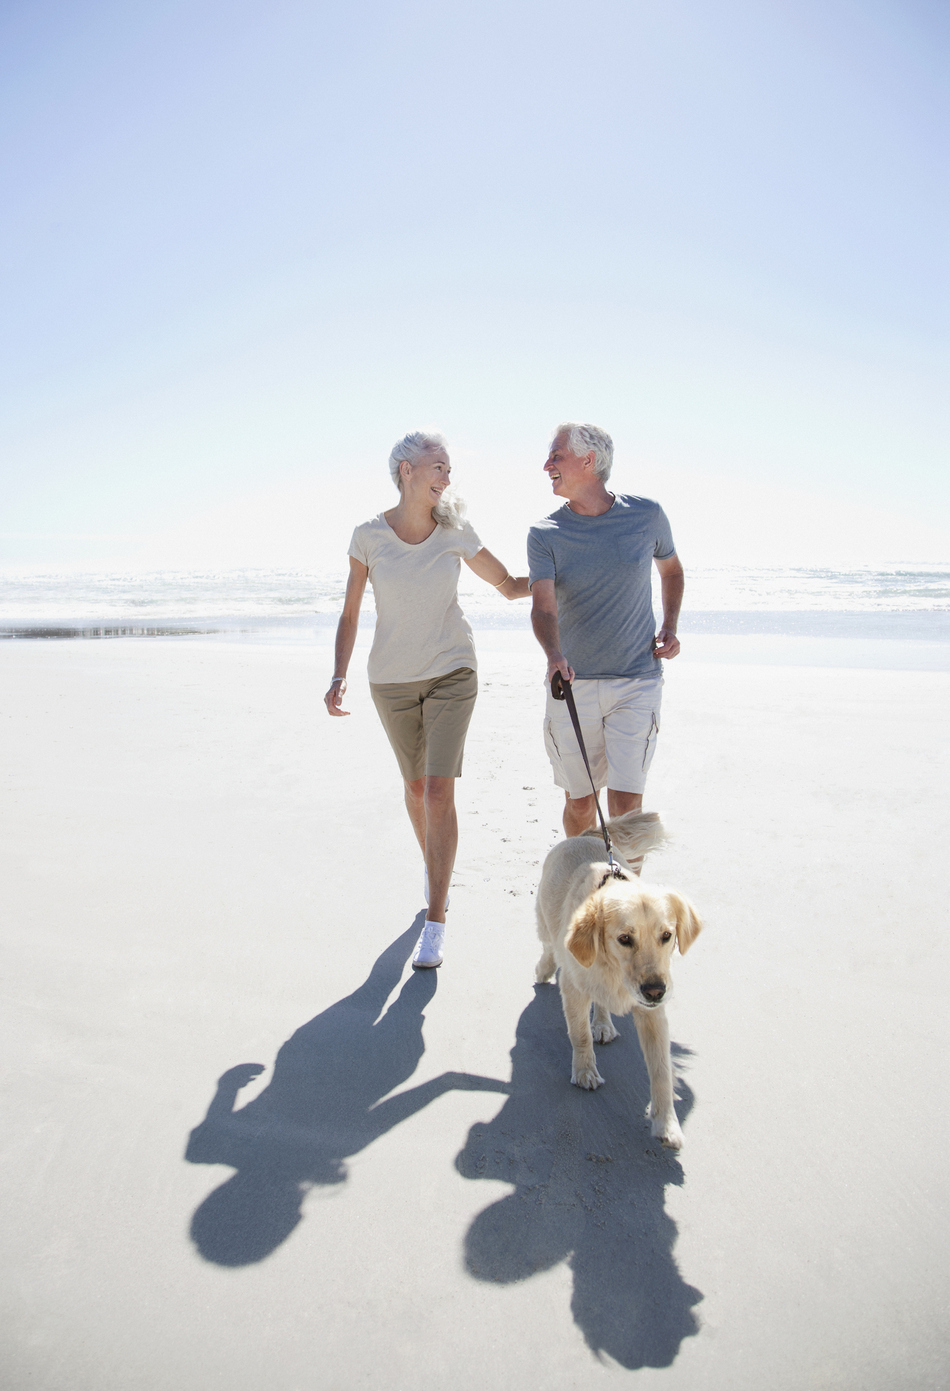 Physical Activity After a Knee or Hip Replacement